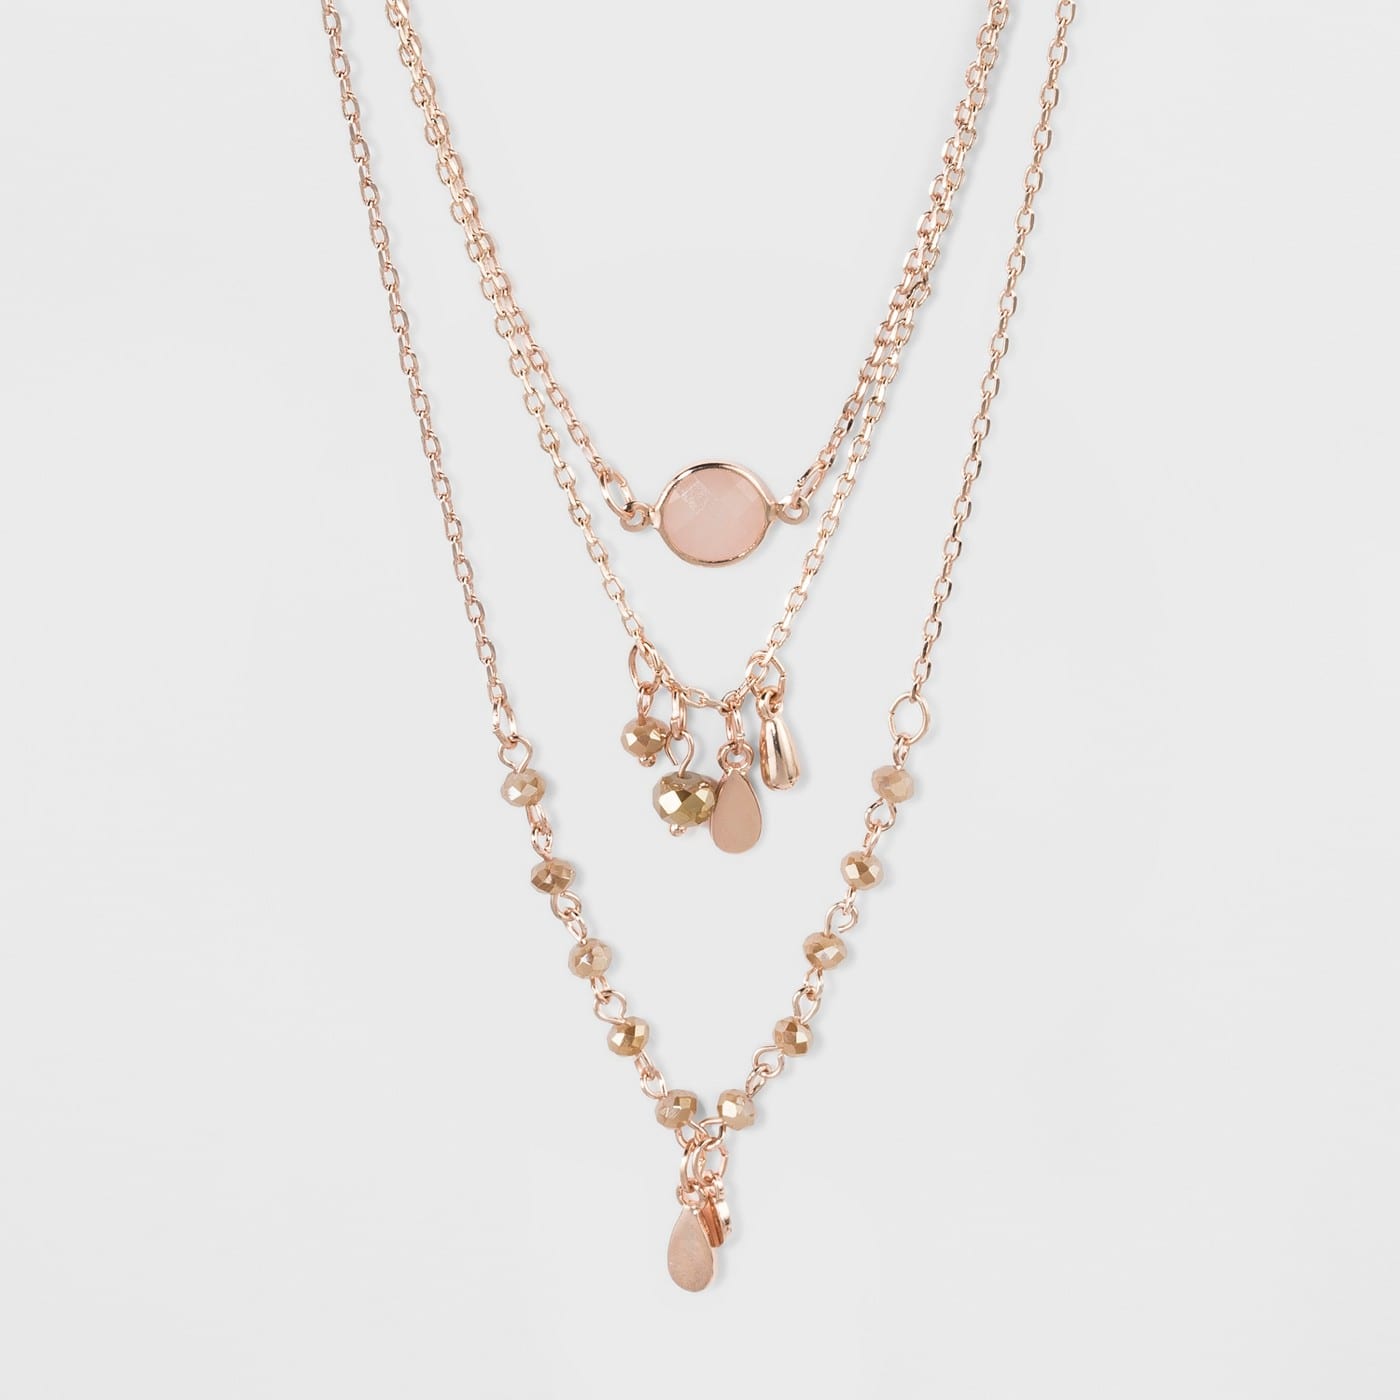 target necklace - Adore Your Wardrobe®